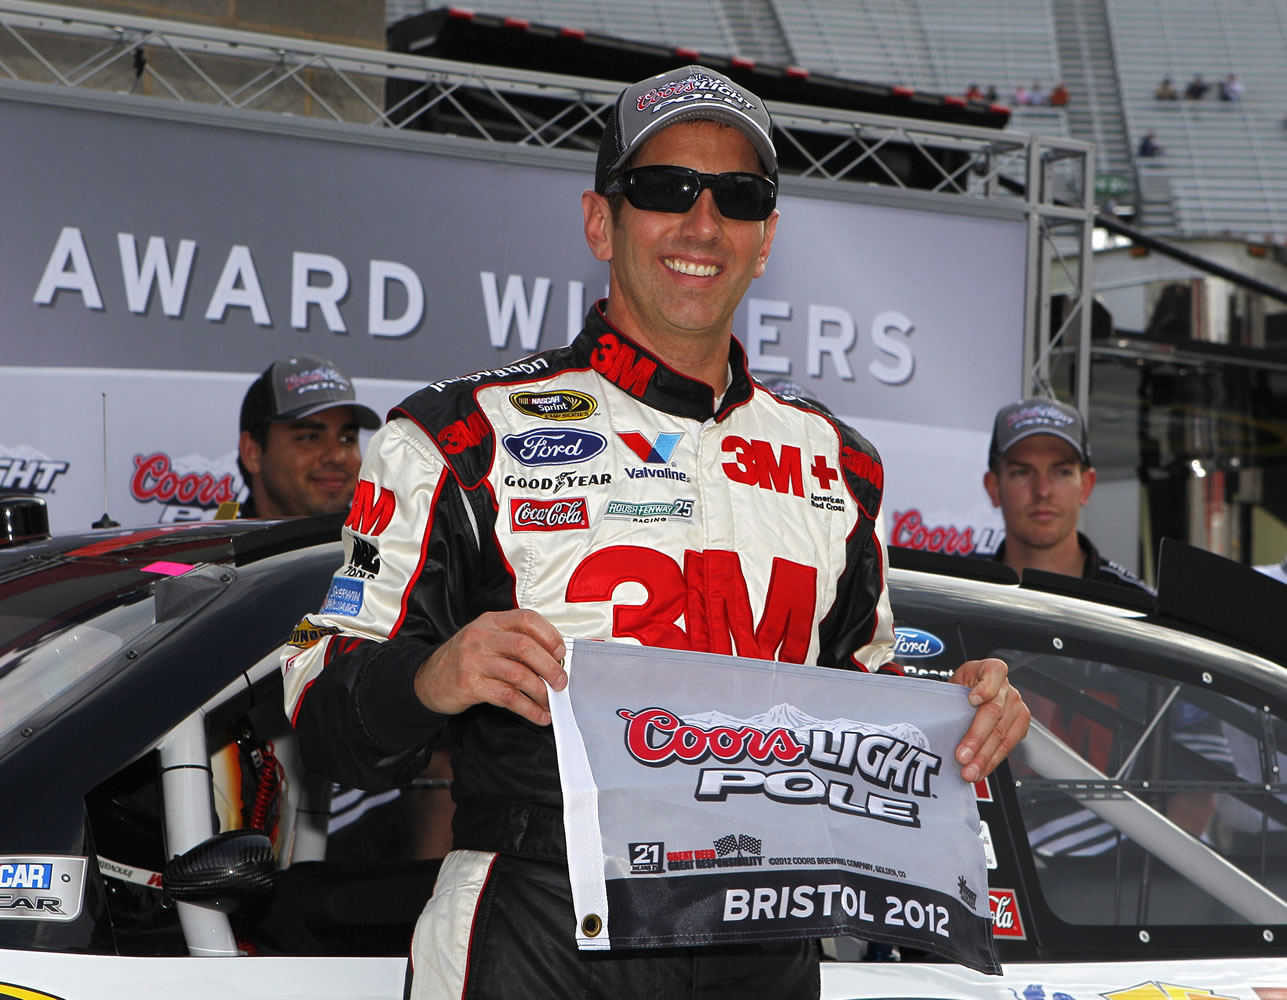 Greg Biffle poses for photos after the pole position during qualifying for Sunday's NASCAR Sprint Cup Series auto race on Friday, March 16, 2012, in Bristol, Tenn.